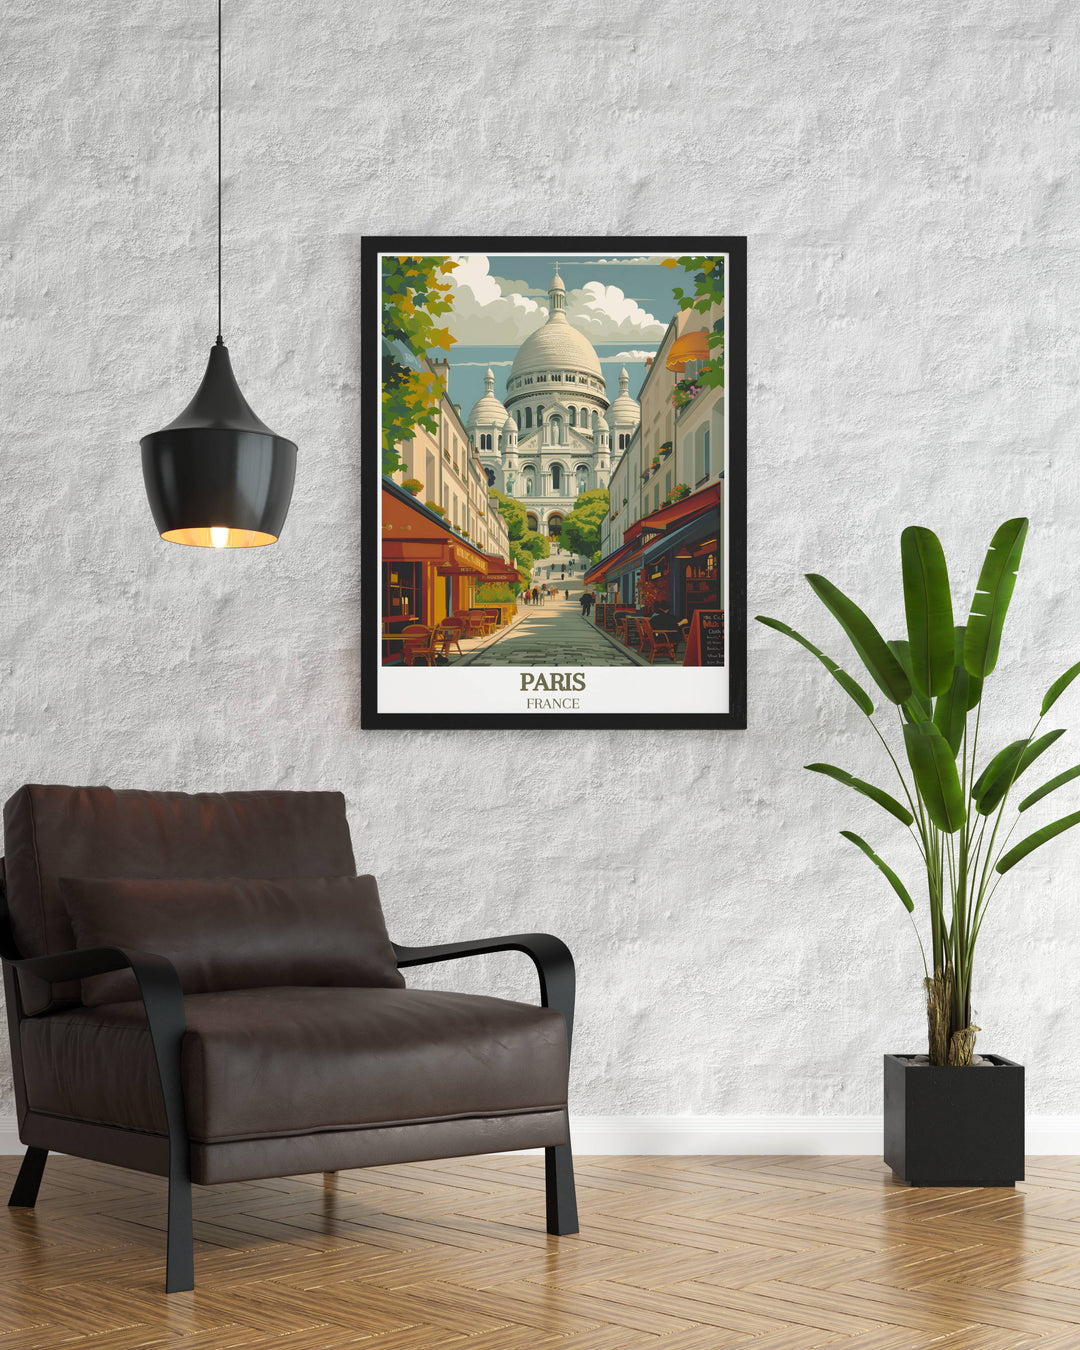 Vintage style posters of Montmartre, evoking a sense of nostalgia and romance, perfect for adding a touch of old world charm to your home decor.